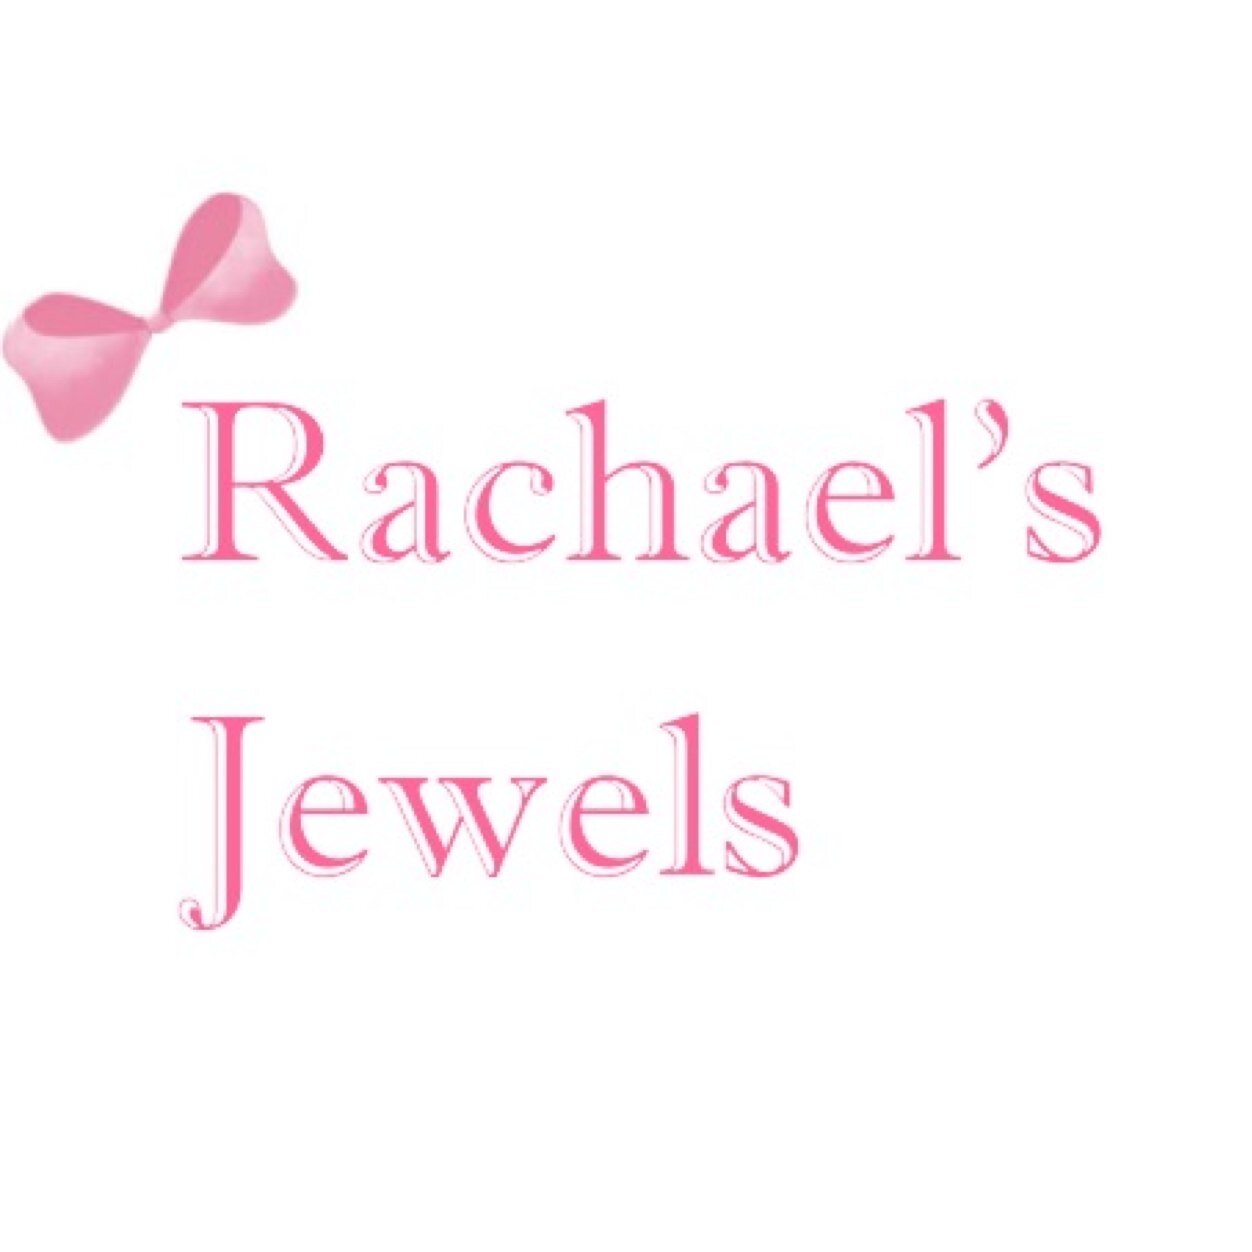 Rachael's Jewels Liverpool based, selling statement necklaces. Hope you all enjoy email me for more info- rachaelbriggs@outlook.com